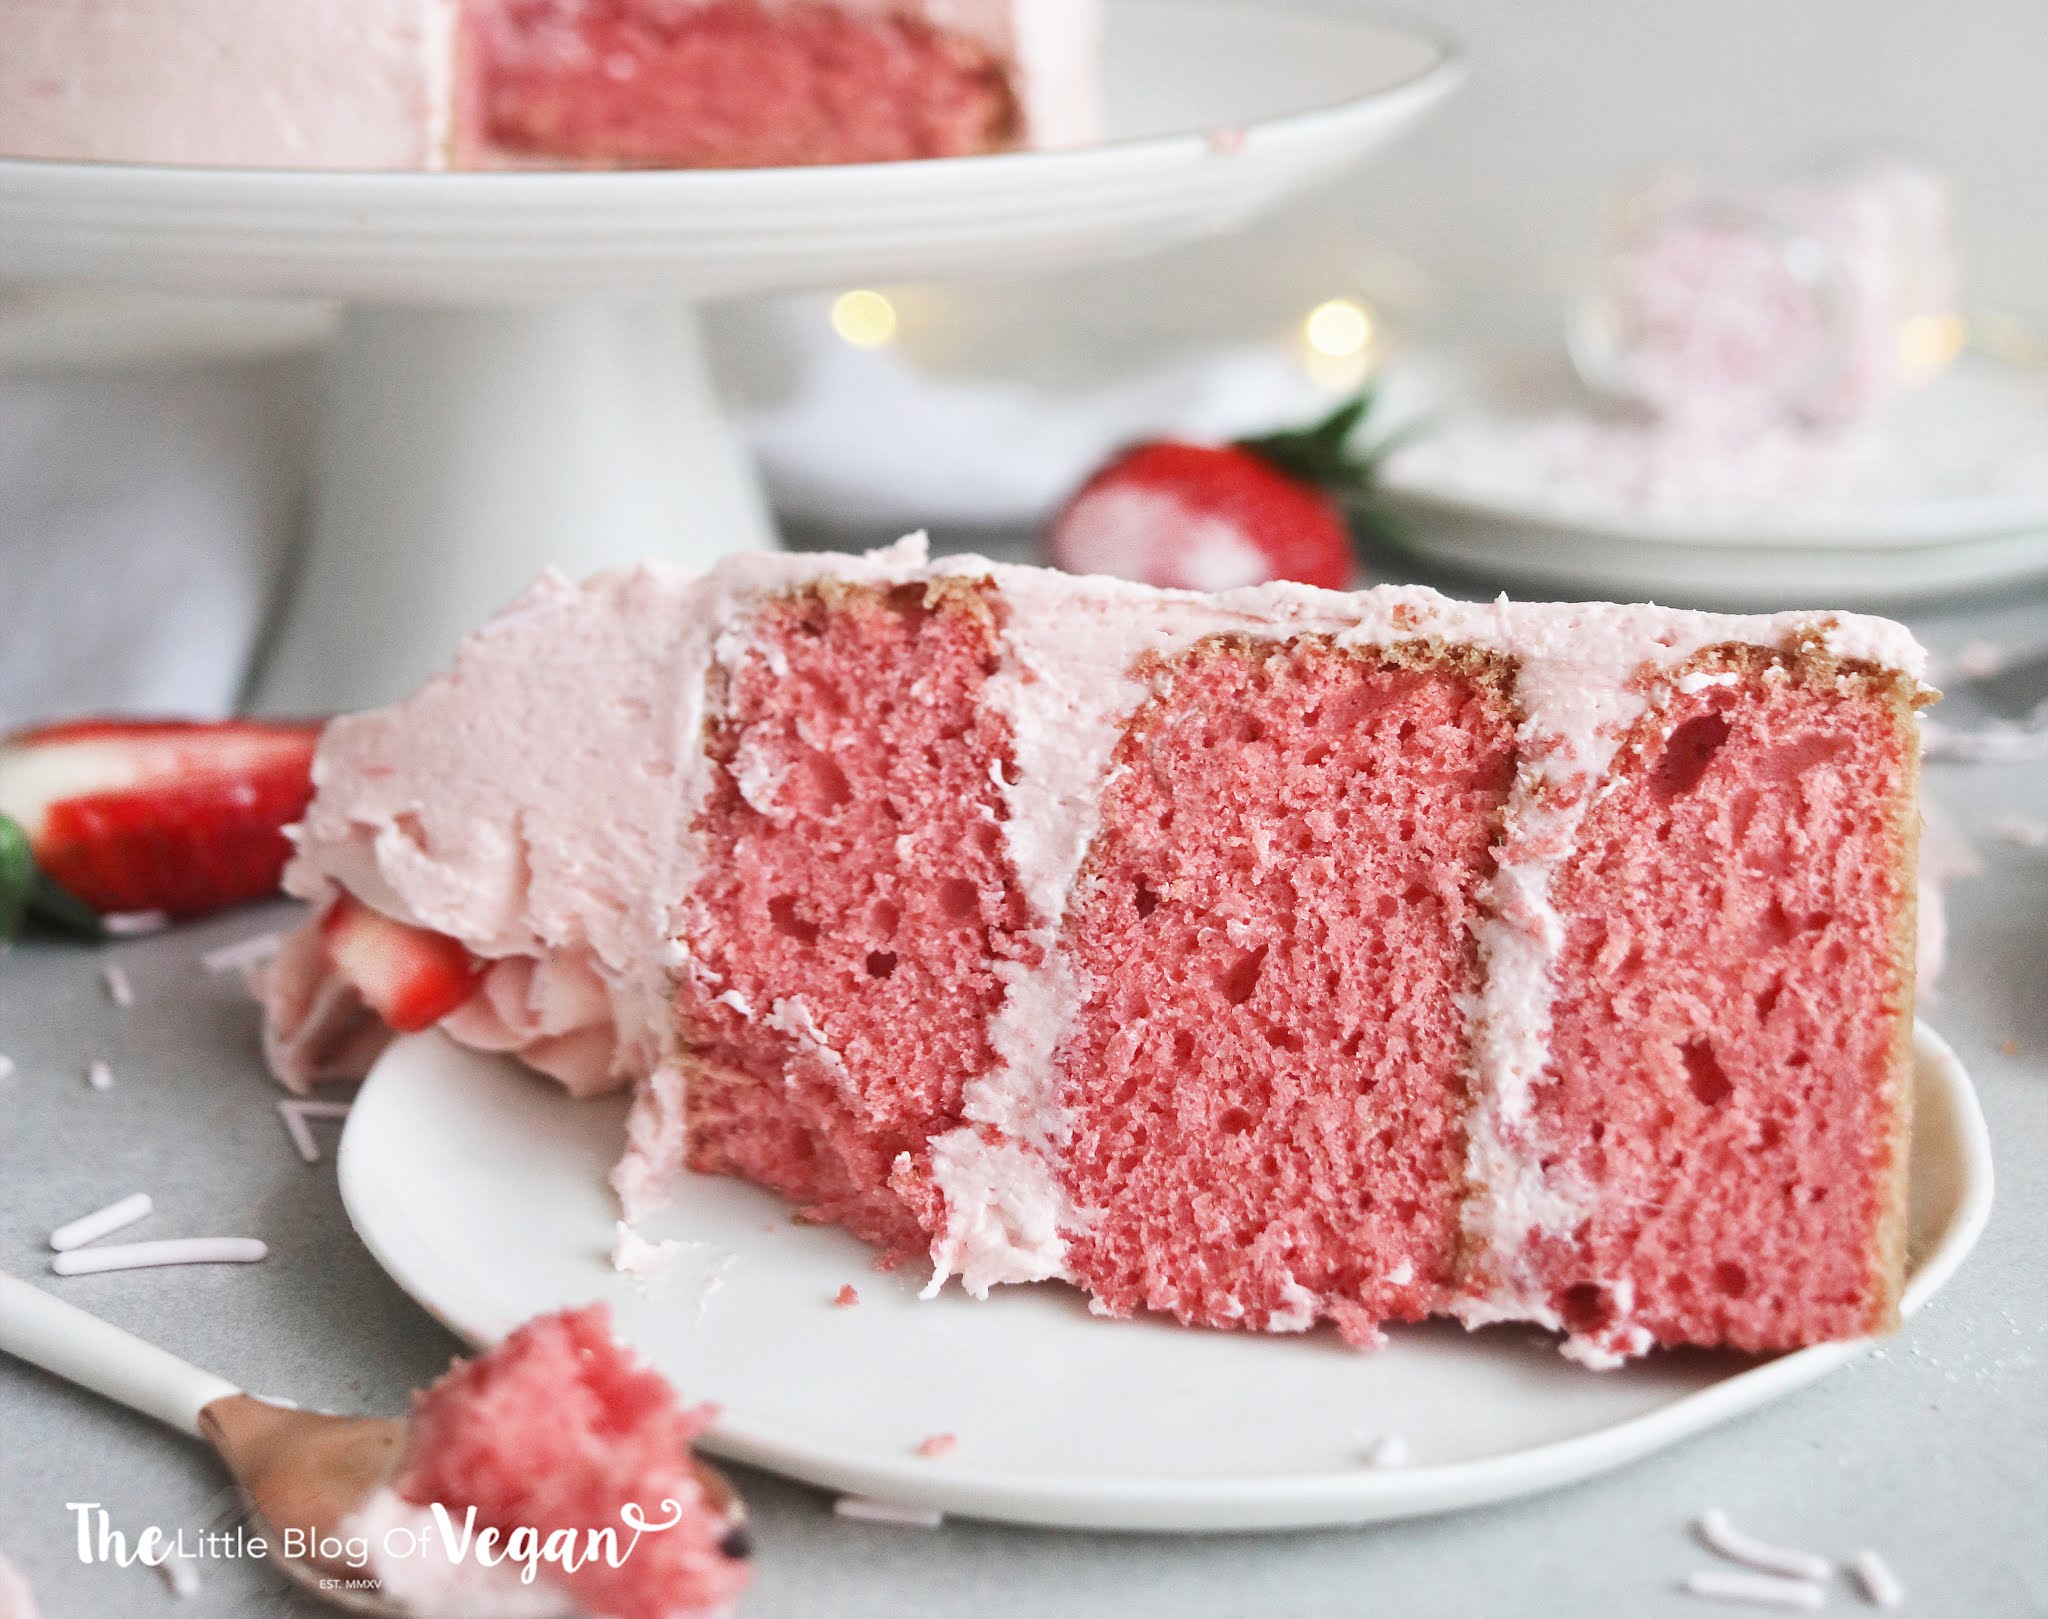 The ultimate pink strawberry cake